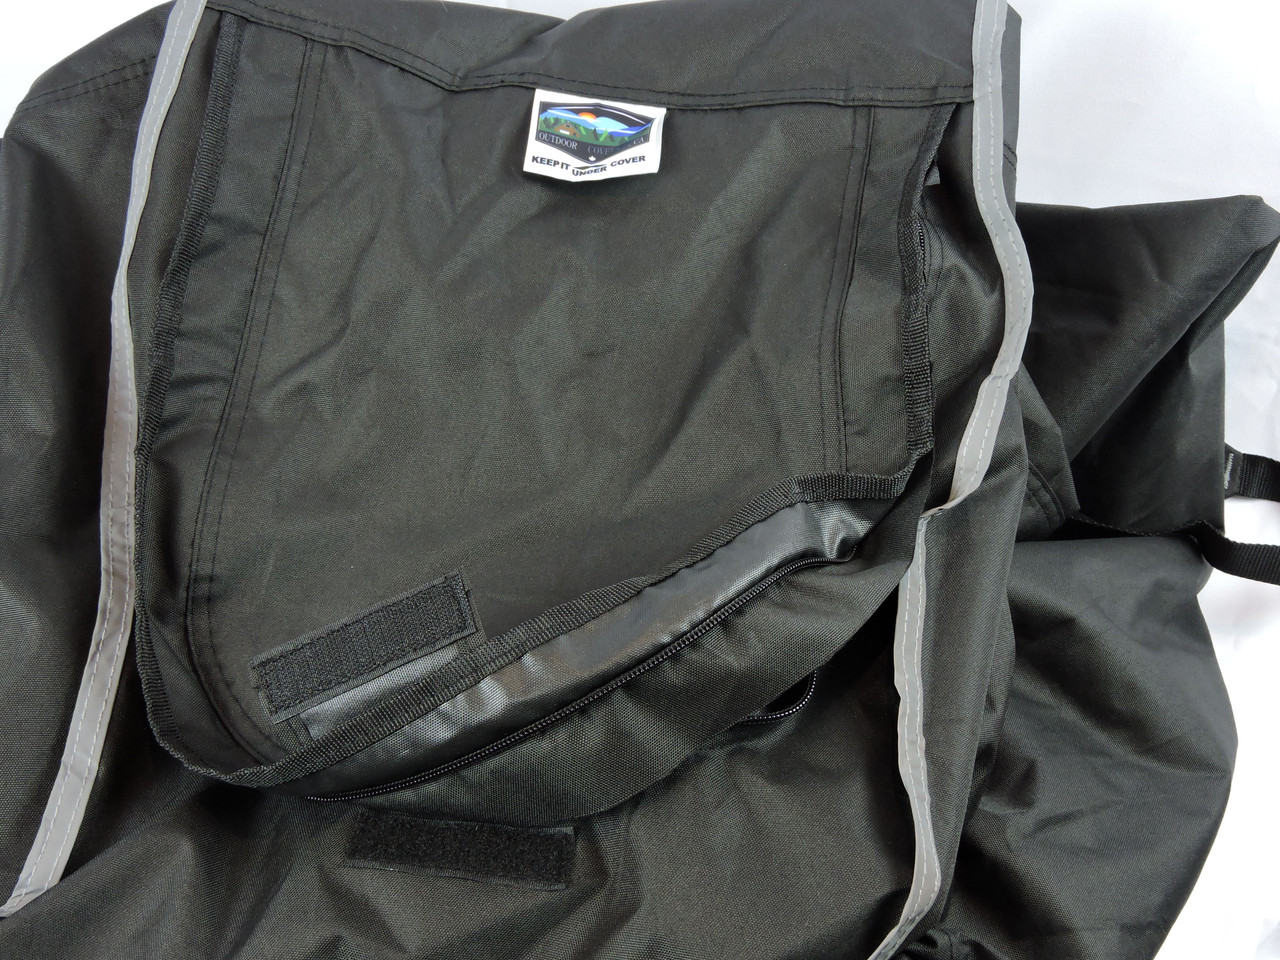 Protective flap for zipper with Velcro closure to ensure flap remains secure